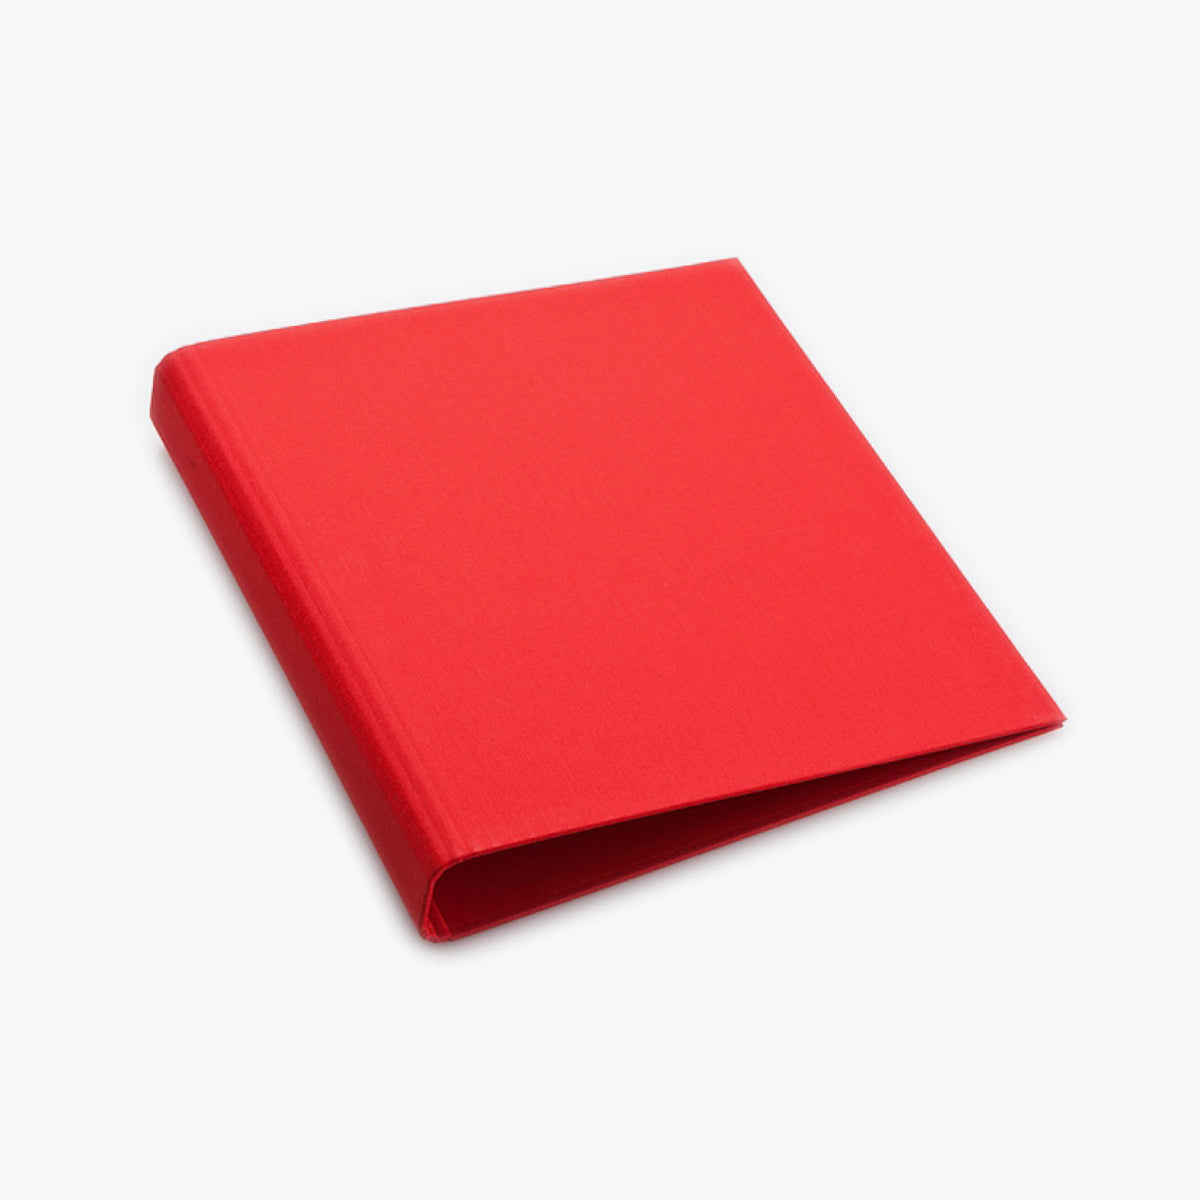 Bookbinders Design - Cloth Ringbinder - A4 - Red <Outgoing>